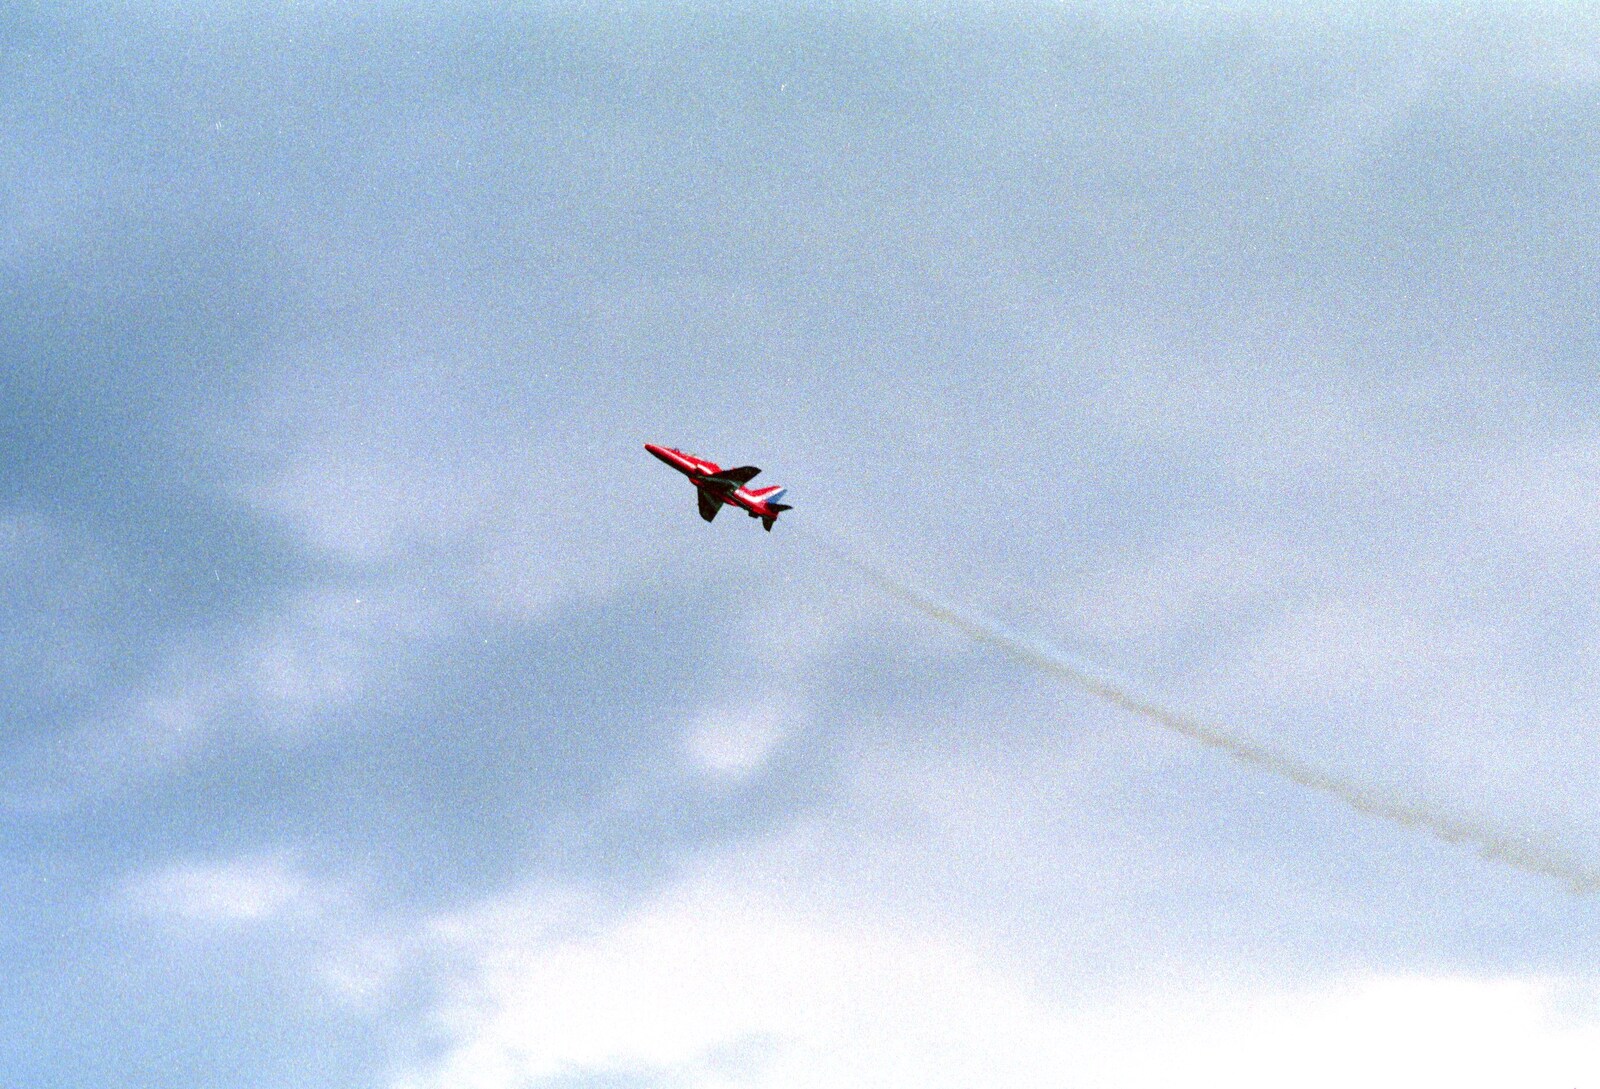 The Red Arrows, and Andrew's CISU Barbeque, Ipswich, Suffolk - 22nd July 2000: One of the synchro pair